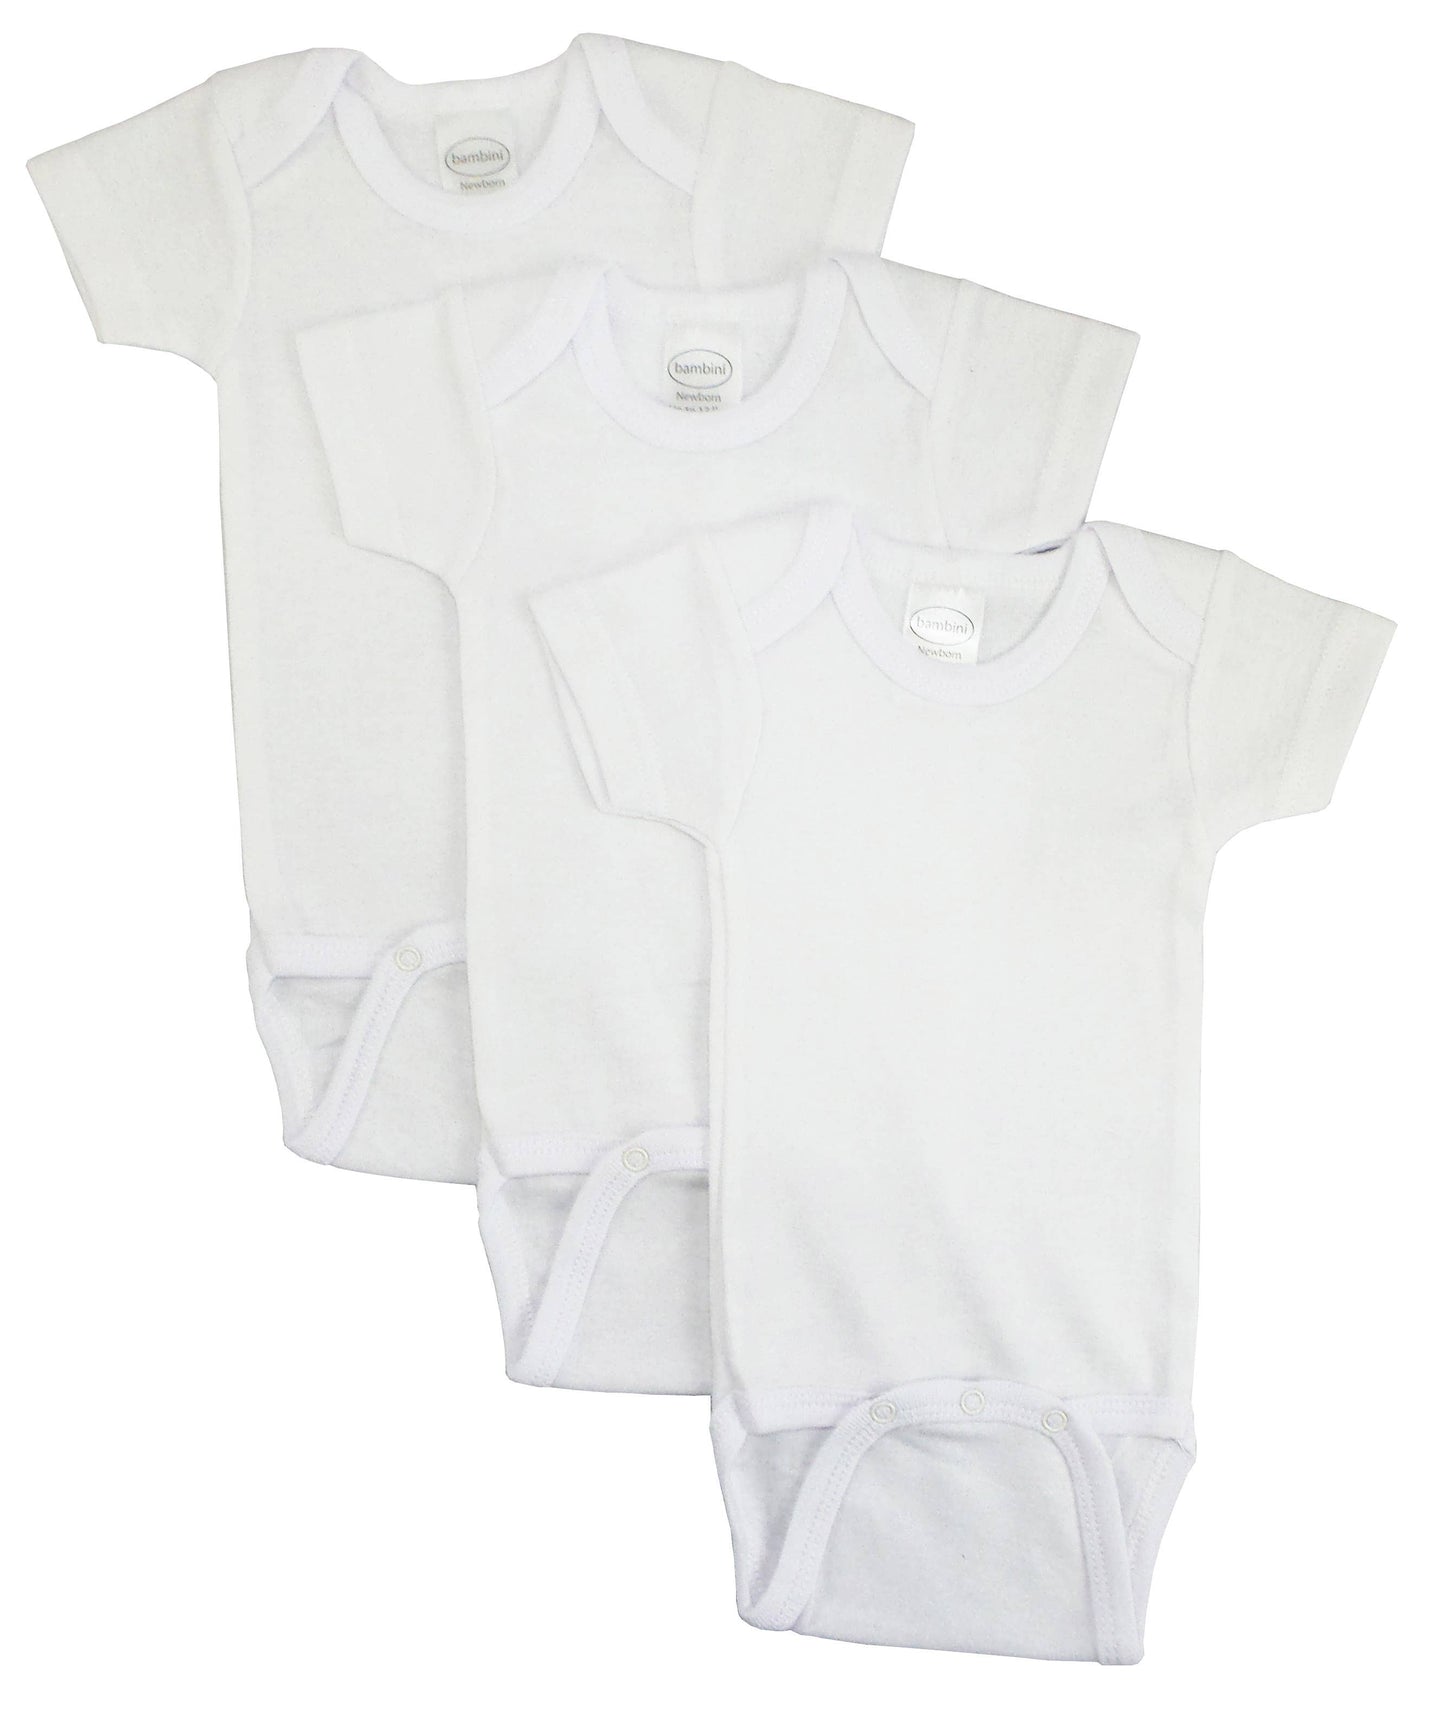 Bambini Infant Wear inc. - Bambini White Short Sleeve One Piece 3 Pack